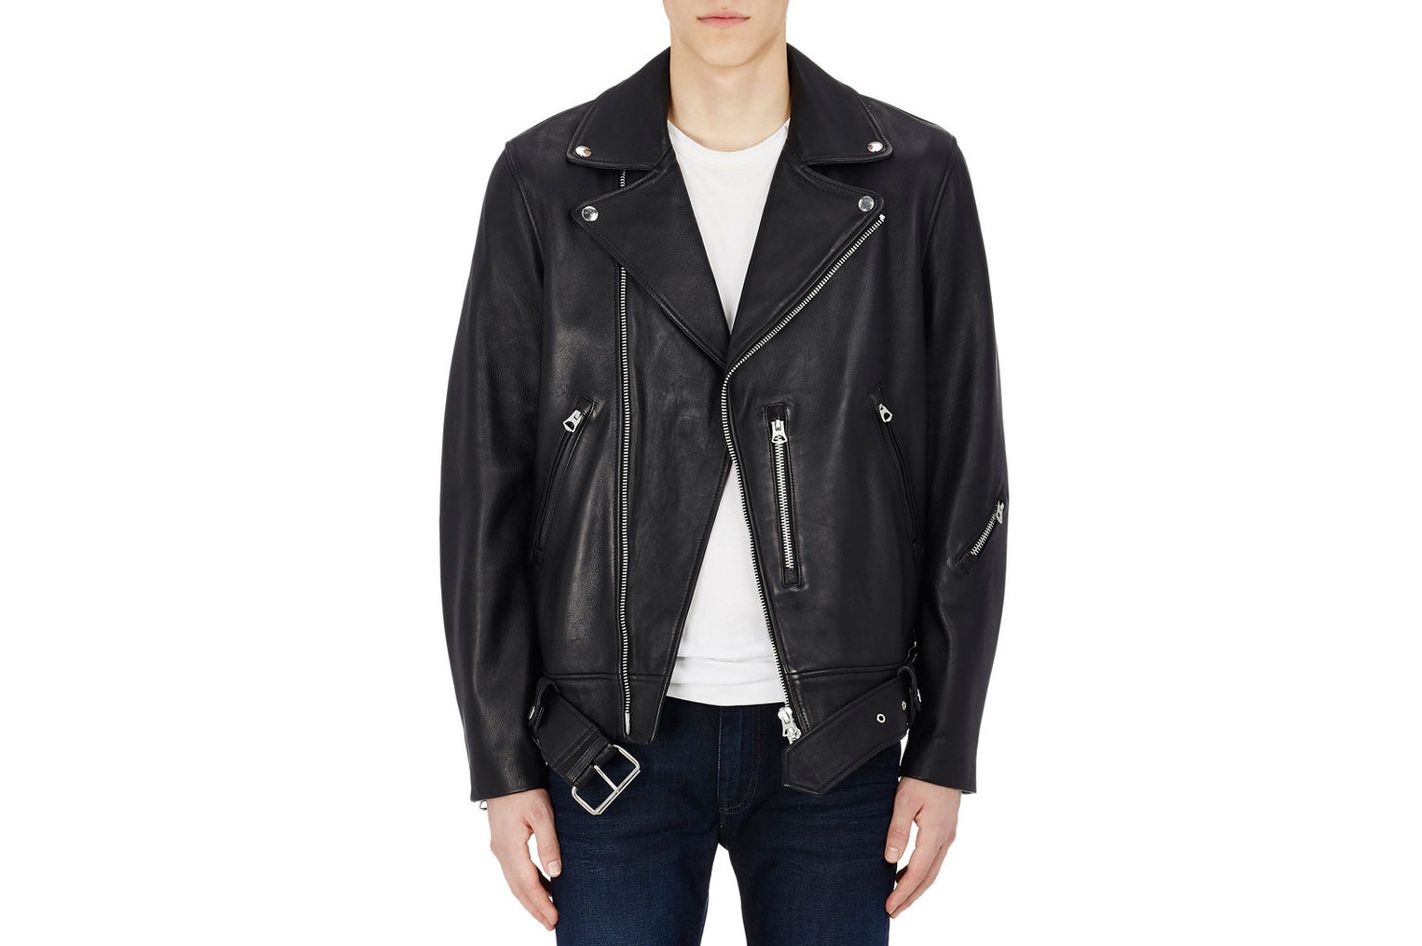 7 Best Leather Jackets for Men